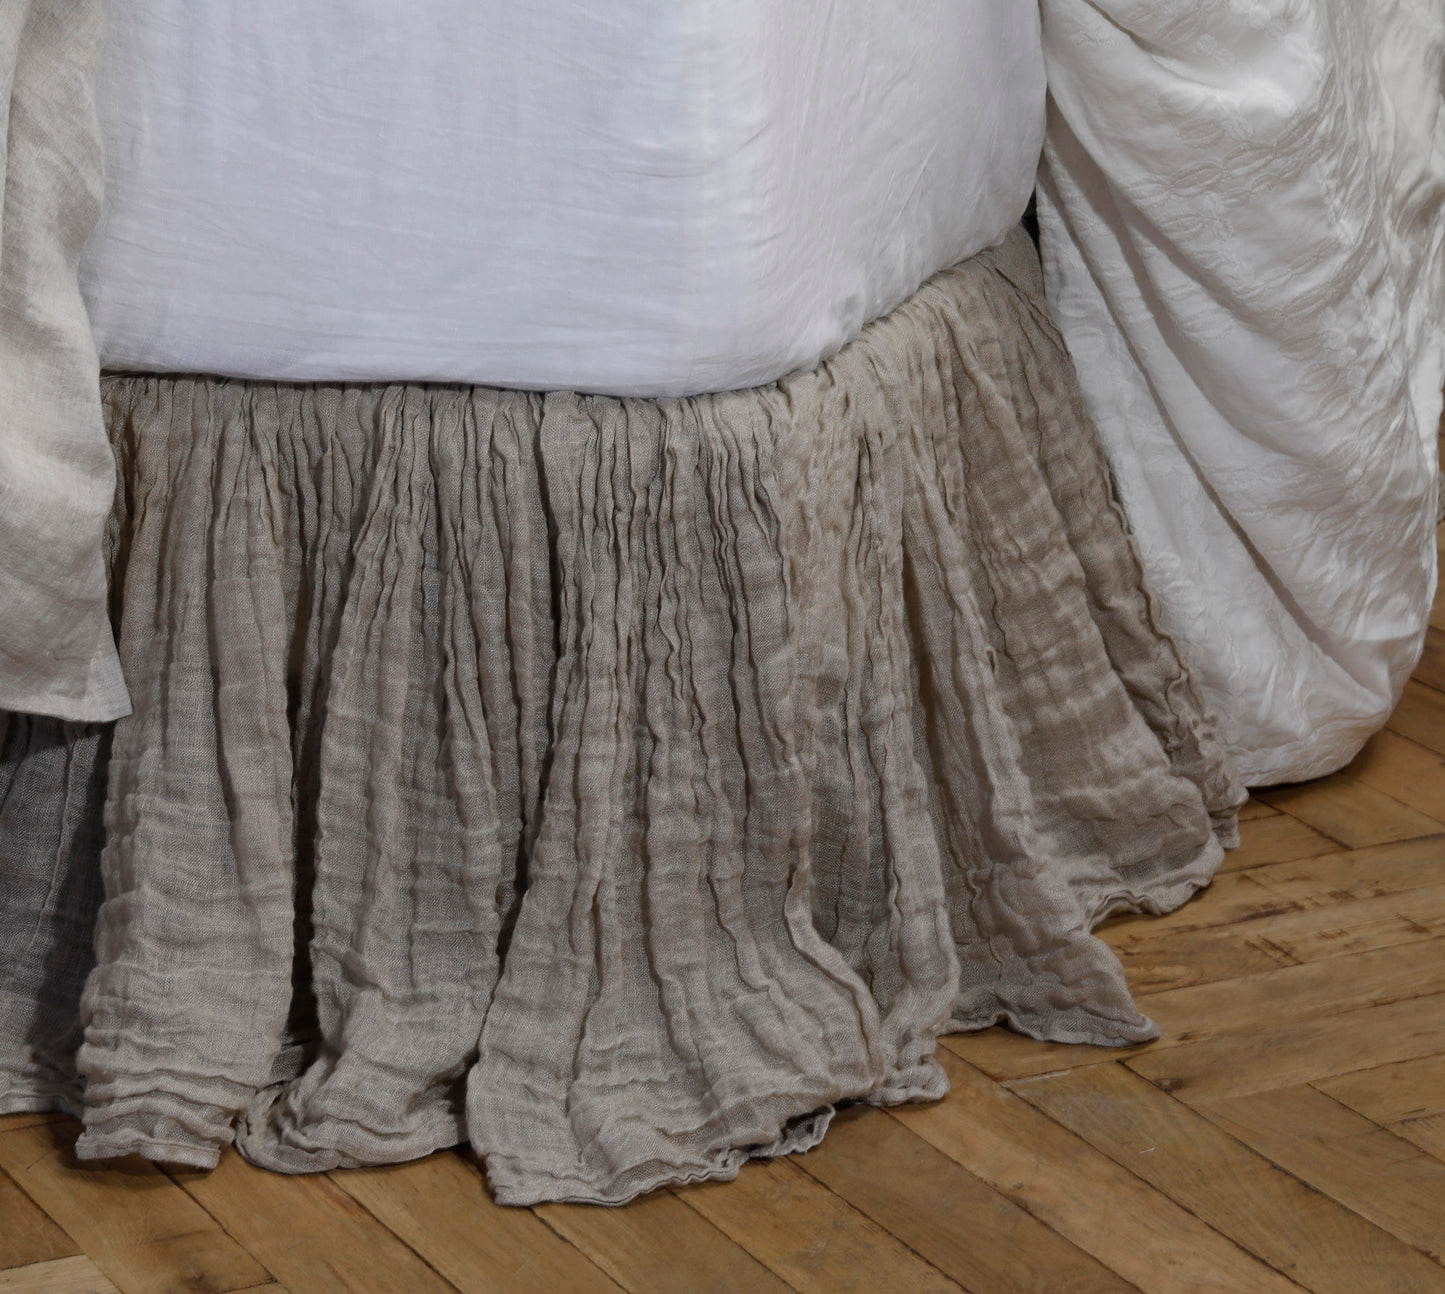 Buy Linen ruffle Sea Isle Bed Skirt for bedroom sets king size